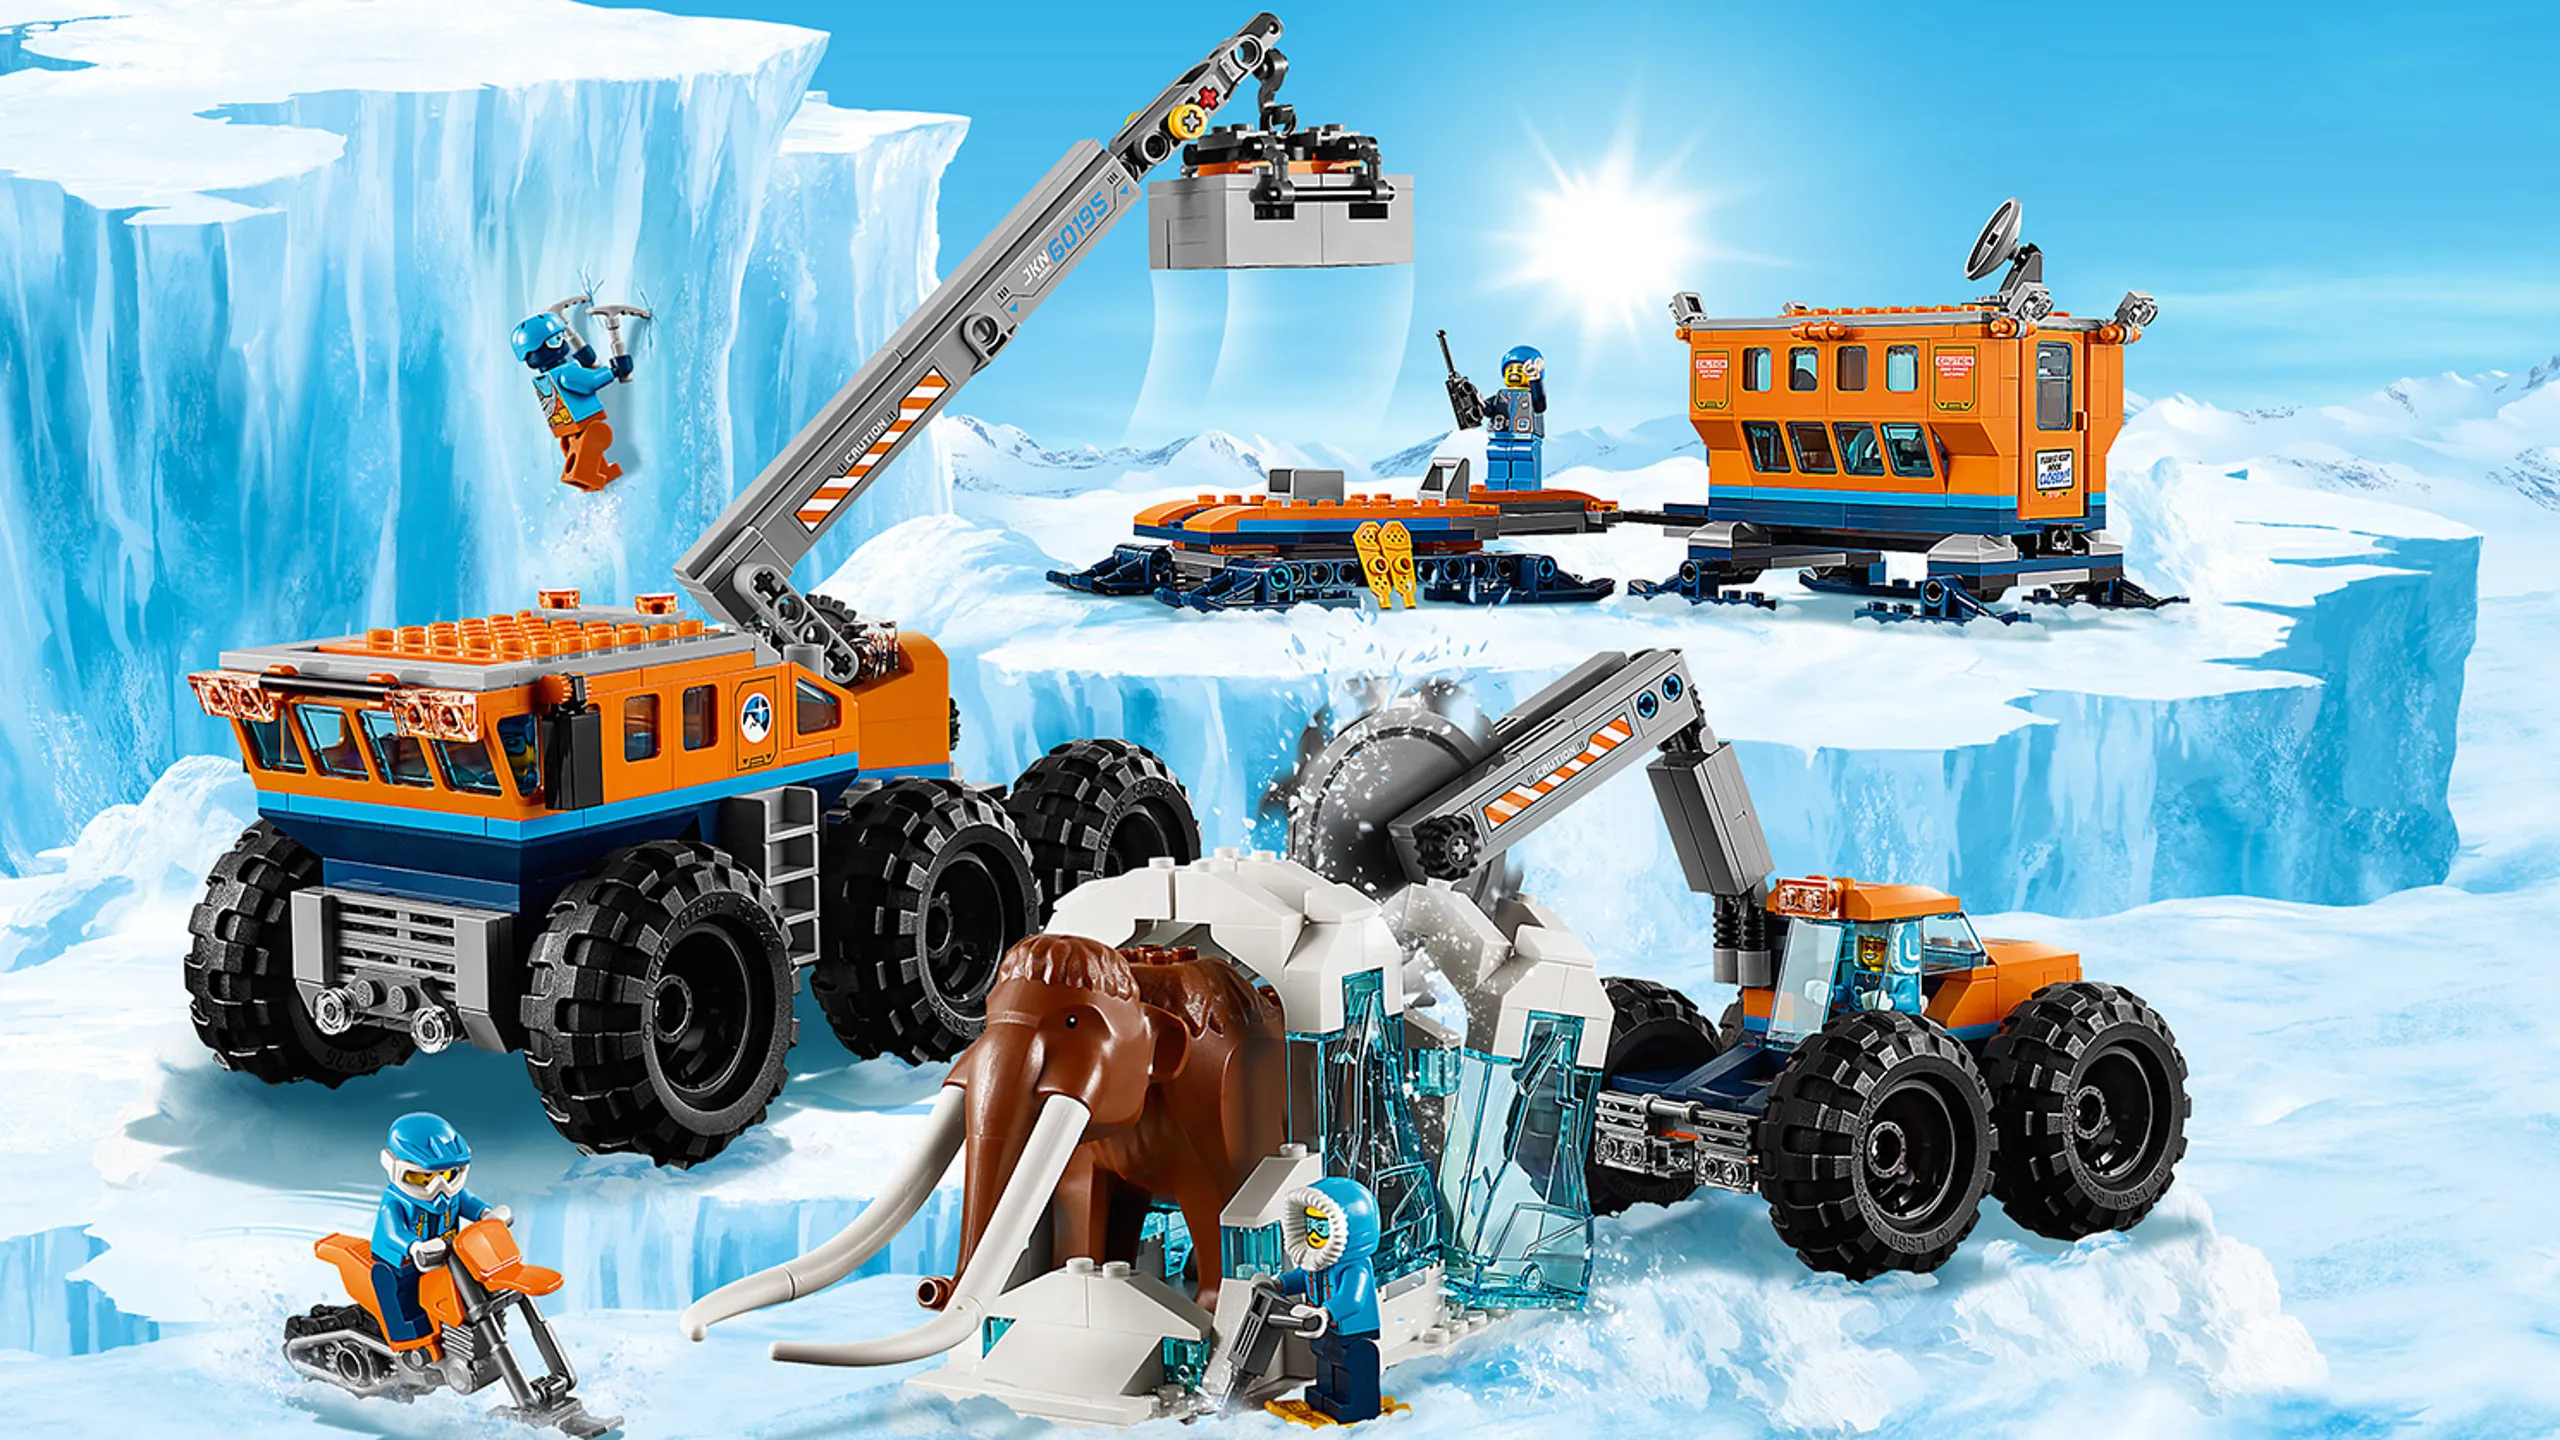 LEGO City Arctic Expedition - 60195 Arctic Mobile Exploration Base - The arctic workers have used all their machines and vehicles to get a mammoth up from deep inside the ice where it has been preserved.